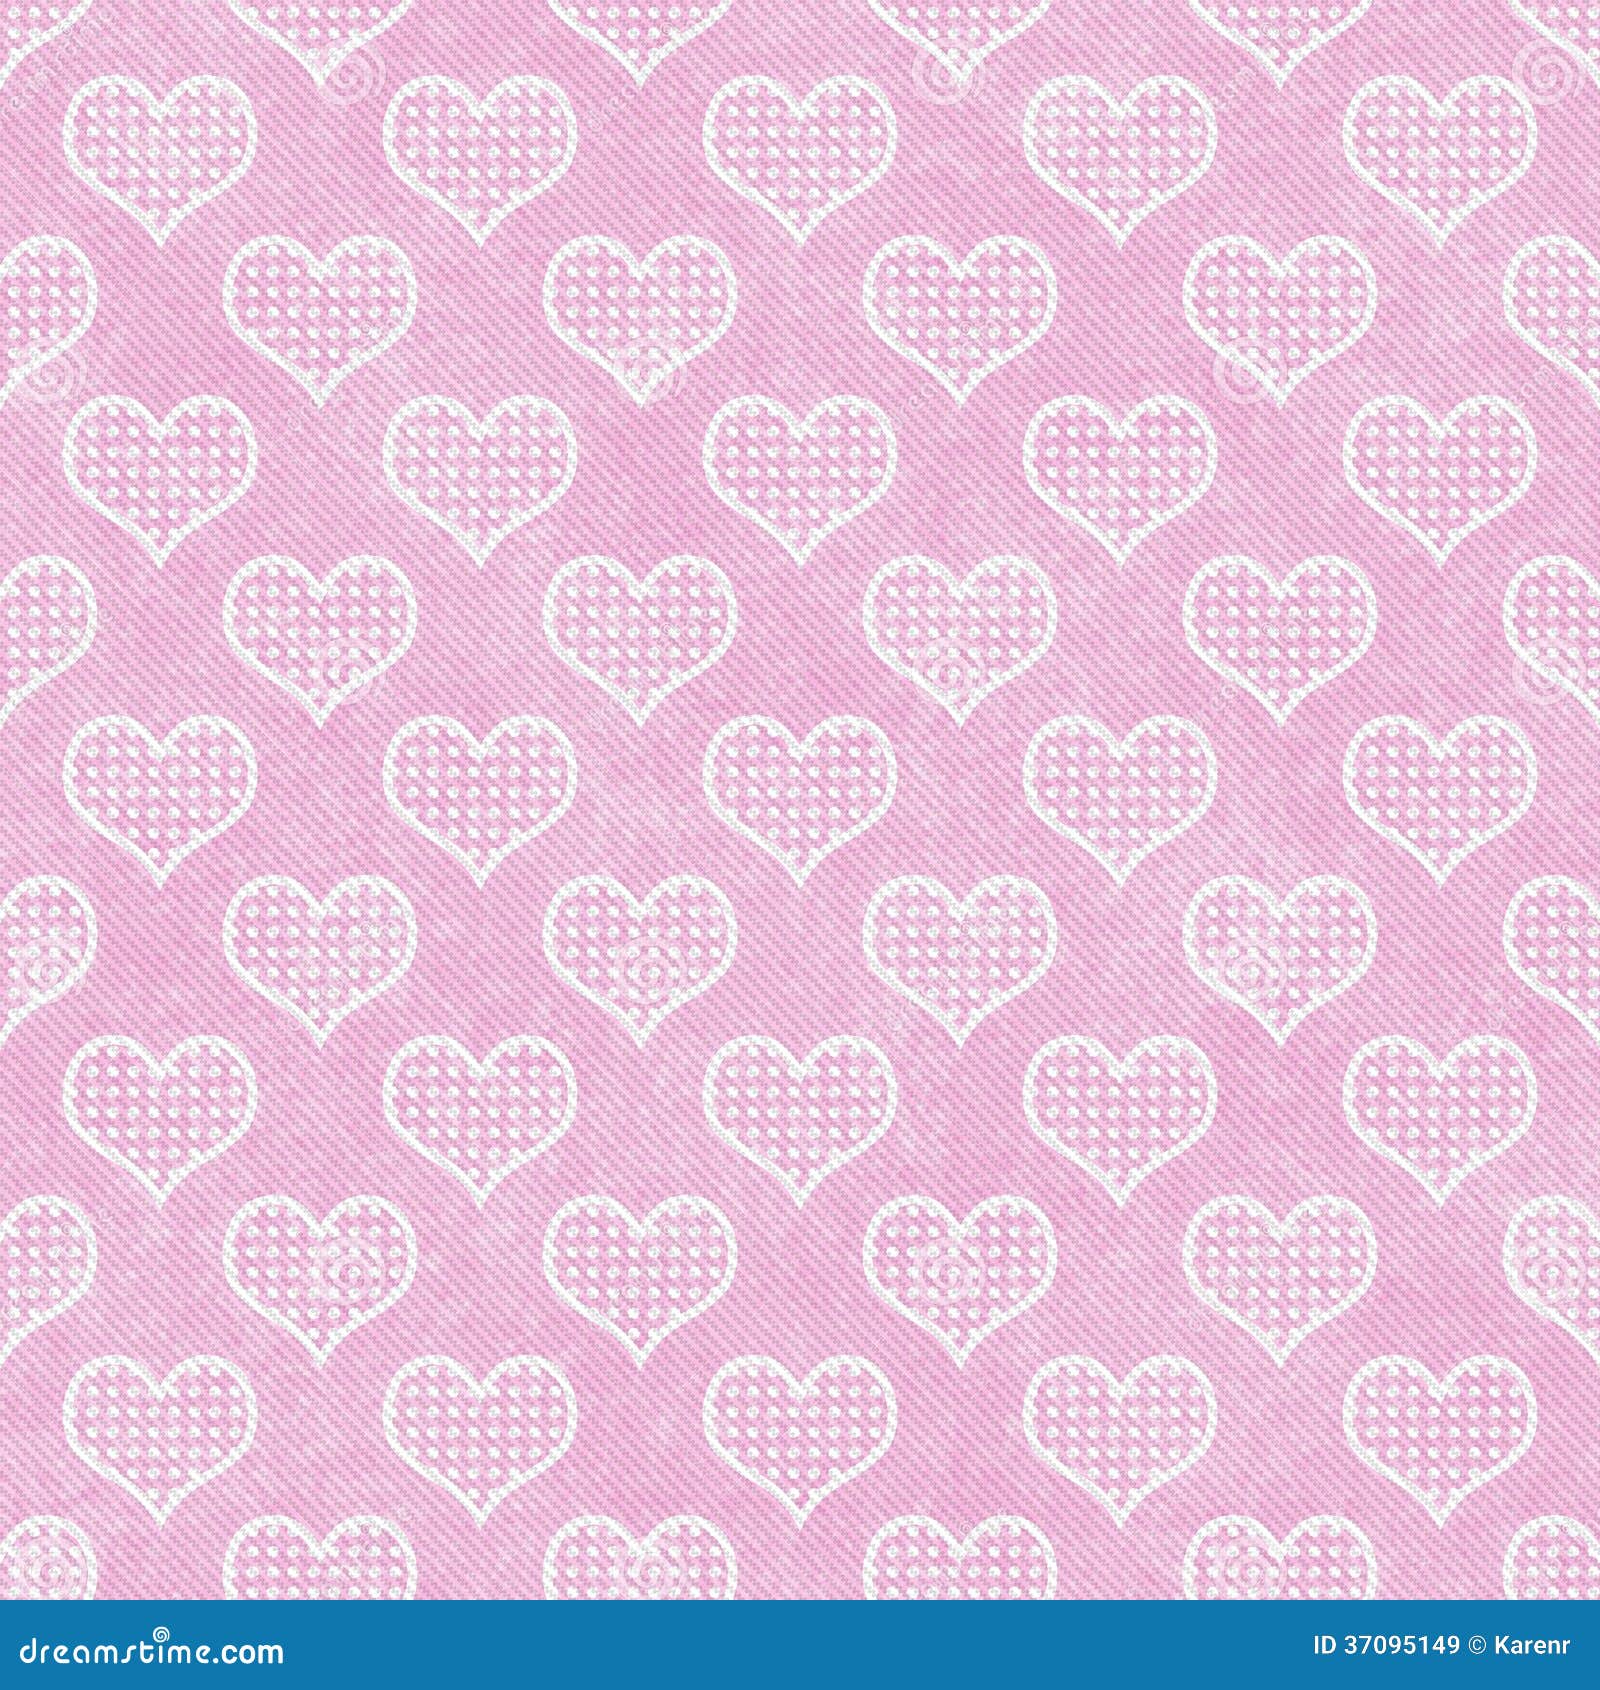 Pink and White Polka Dot Hearts Pattern Repeat Background Stock Image ...